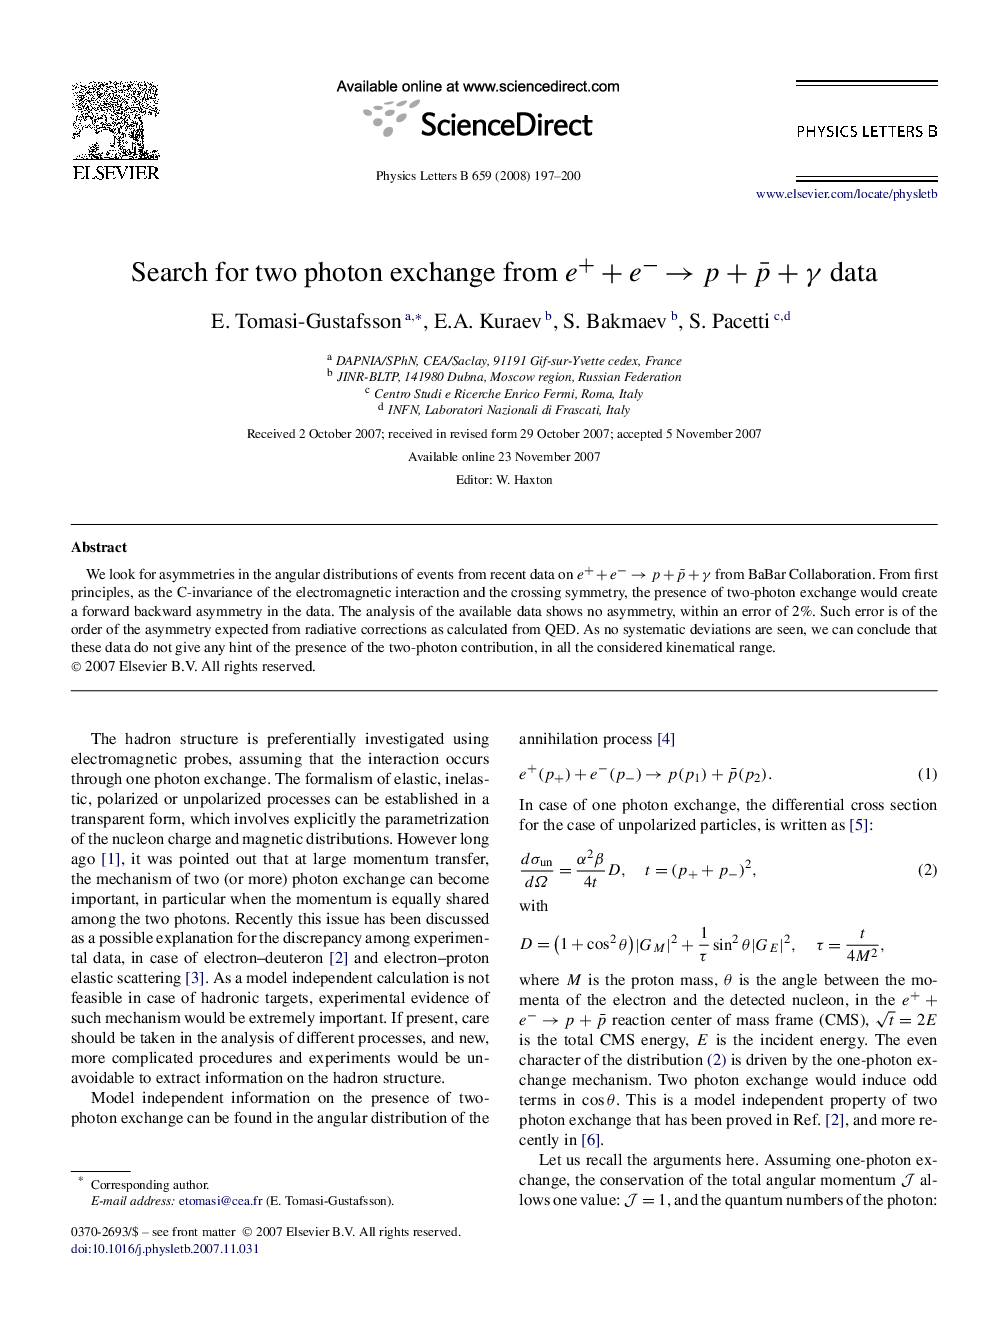 Search for two photon exchange from e++eââp+pÂ¯+Î³ data